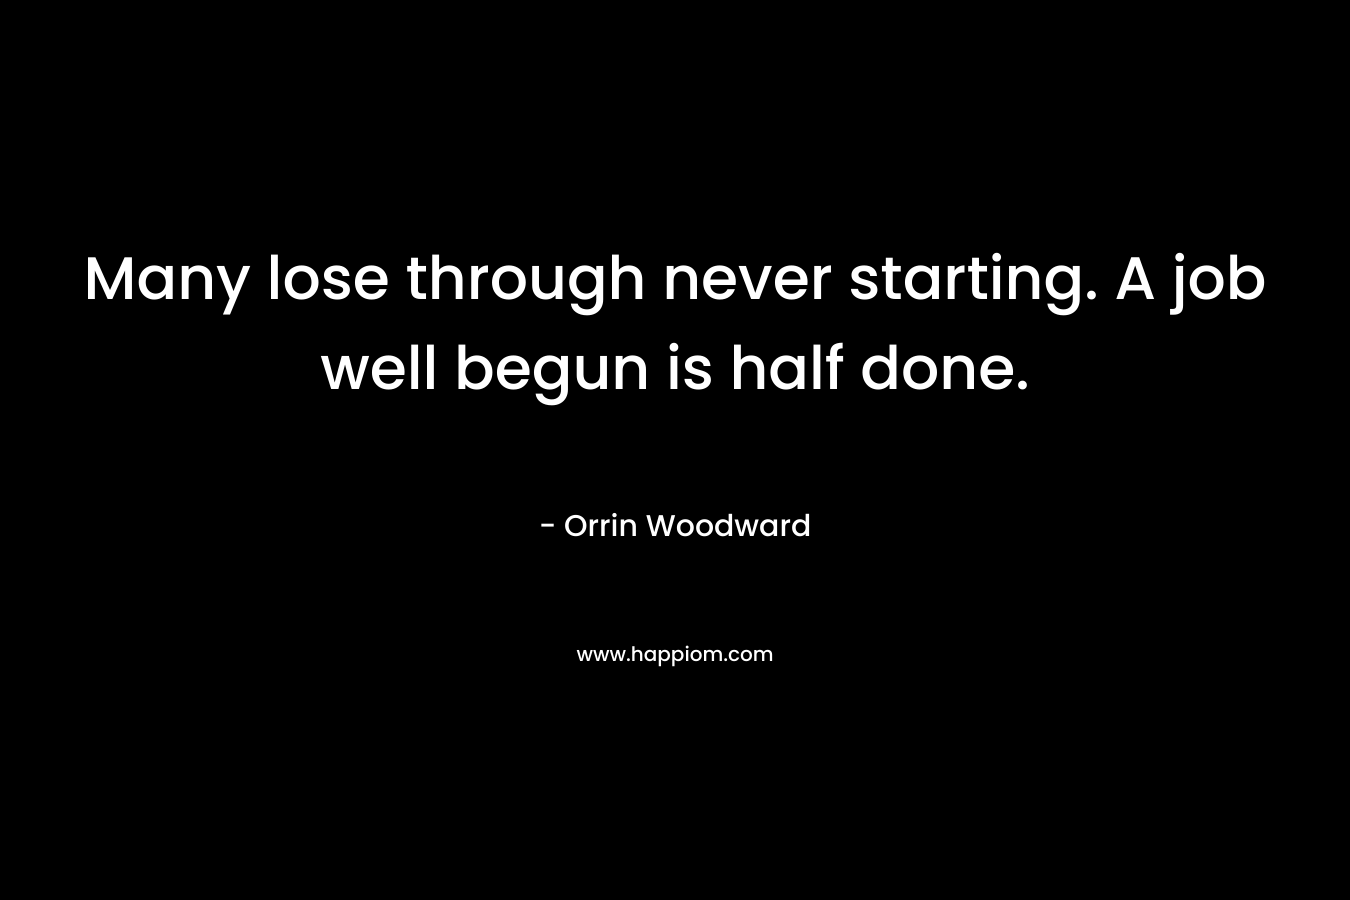 Many lose through never starting. A job well begun is half done. – Orrin Woodward